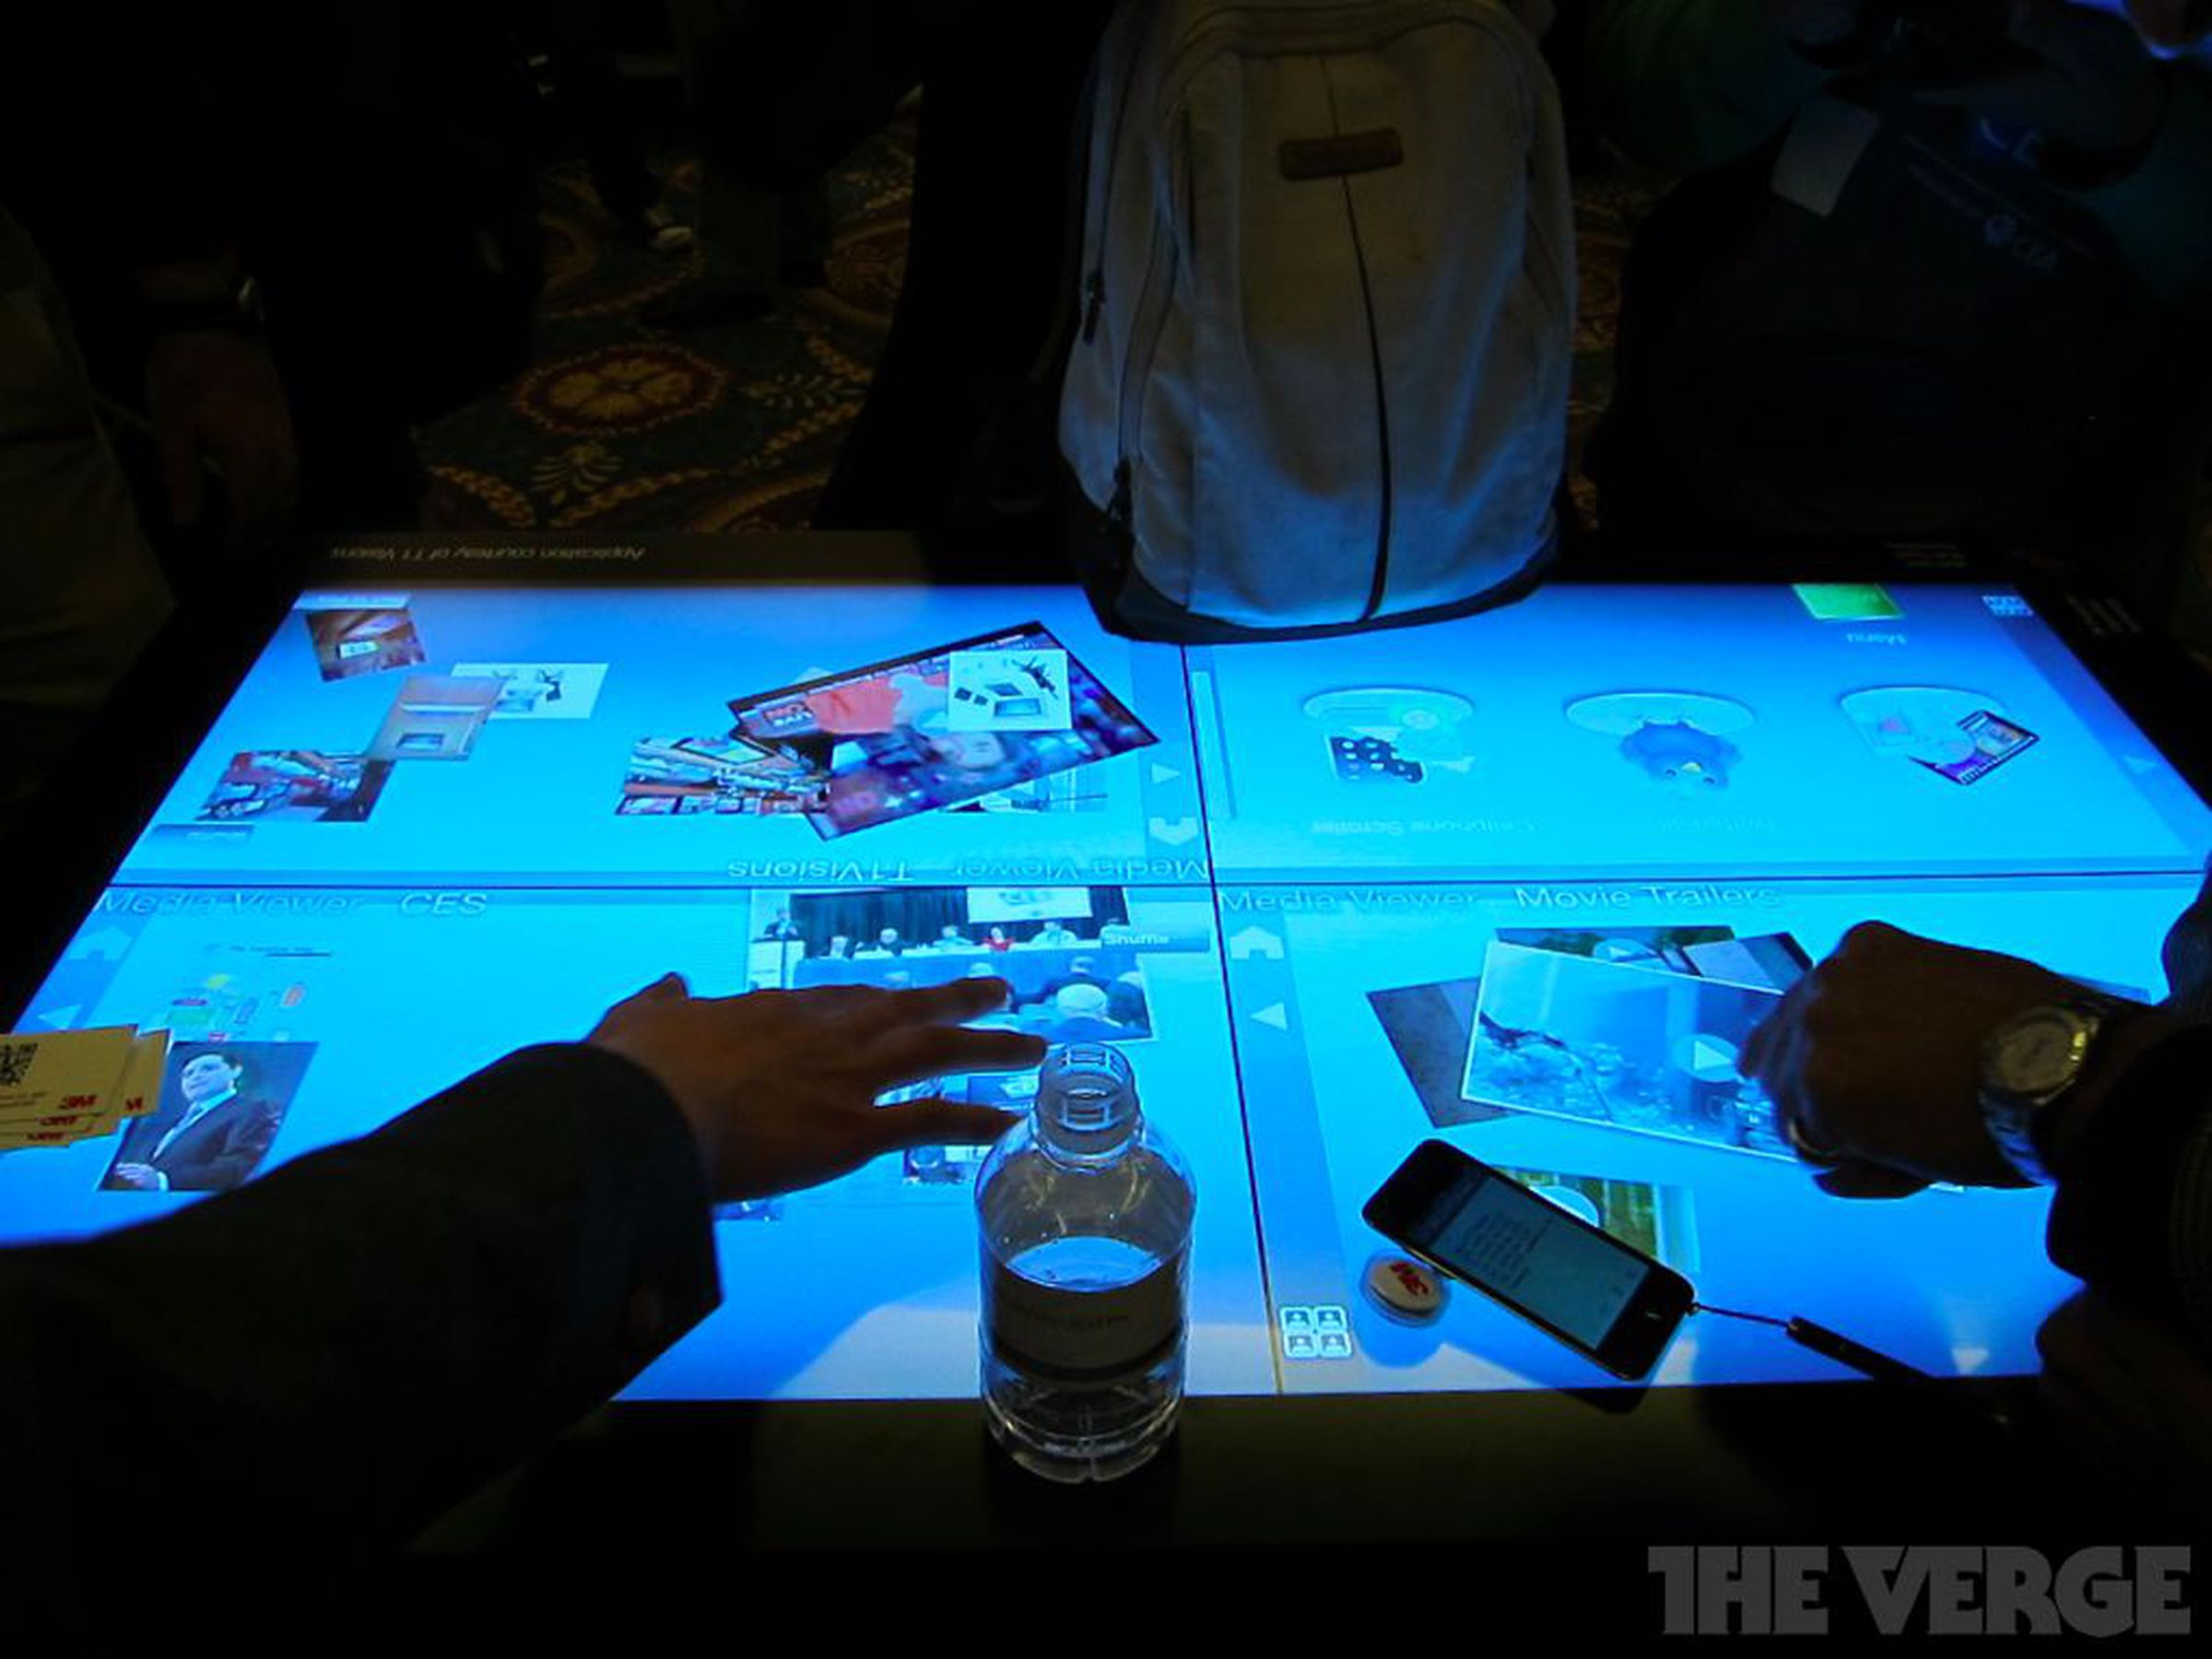 3M 46-inch multitouch table hands-on pictures